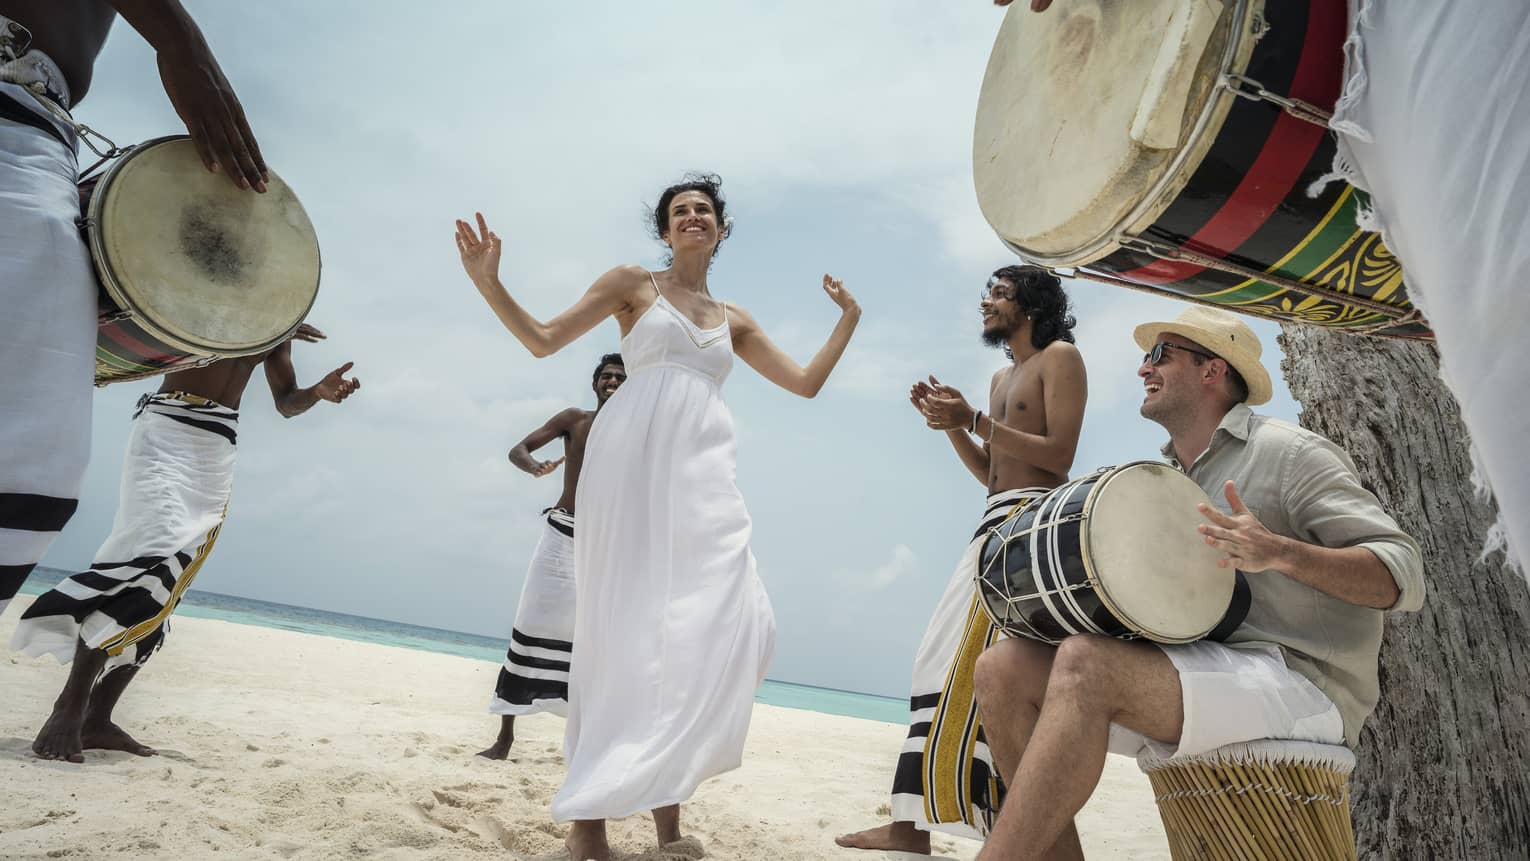 Woman wearing white dress dances in middle of drummers on beach